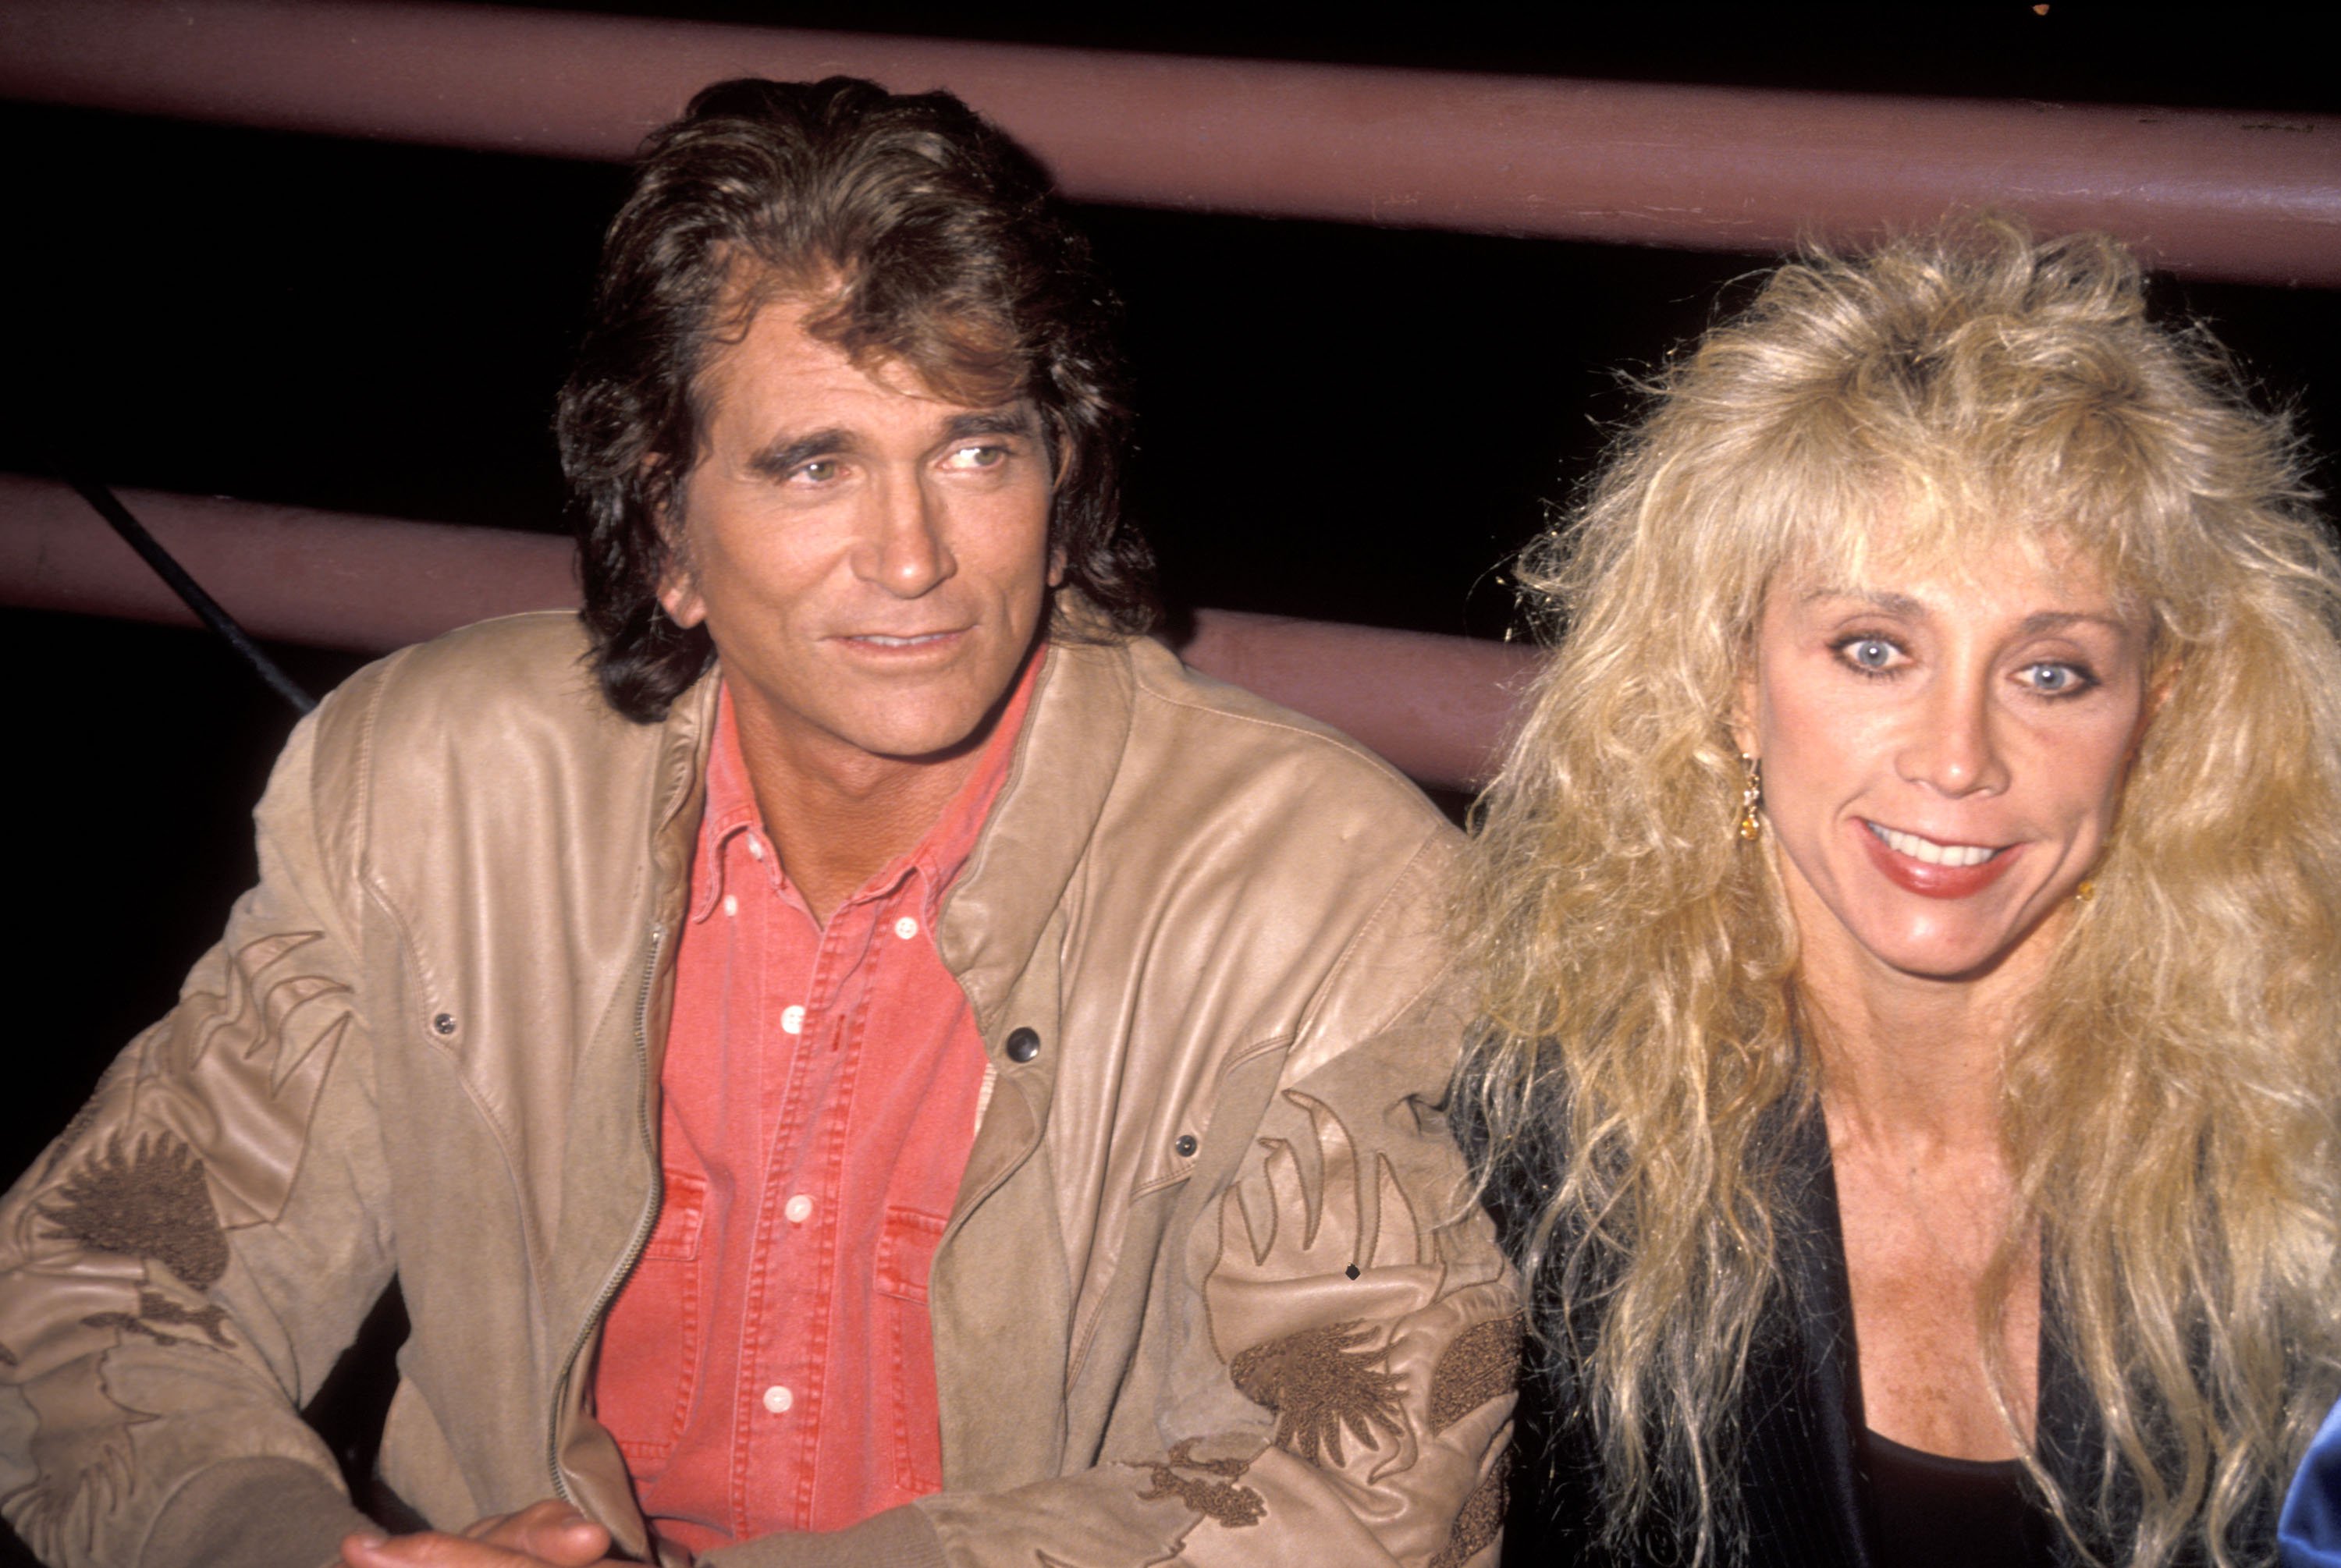 Michael Landon in a red shirt smiling and Cindy Landon smiling in a black jacket.